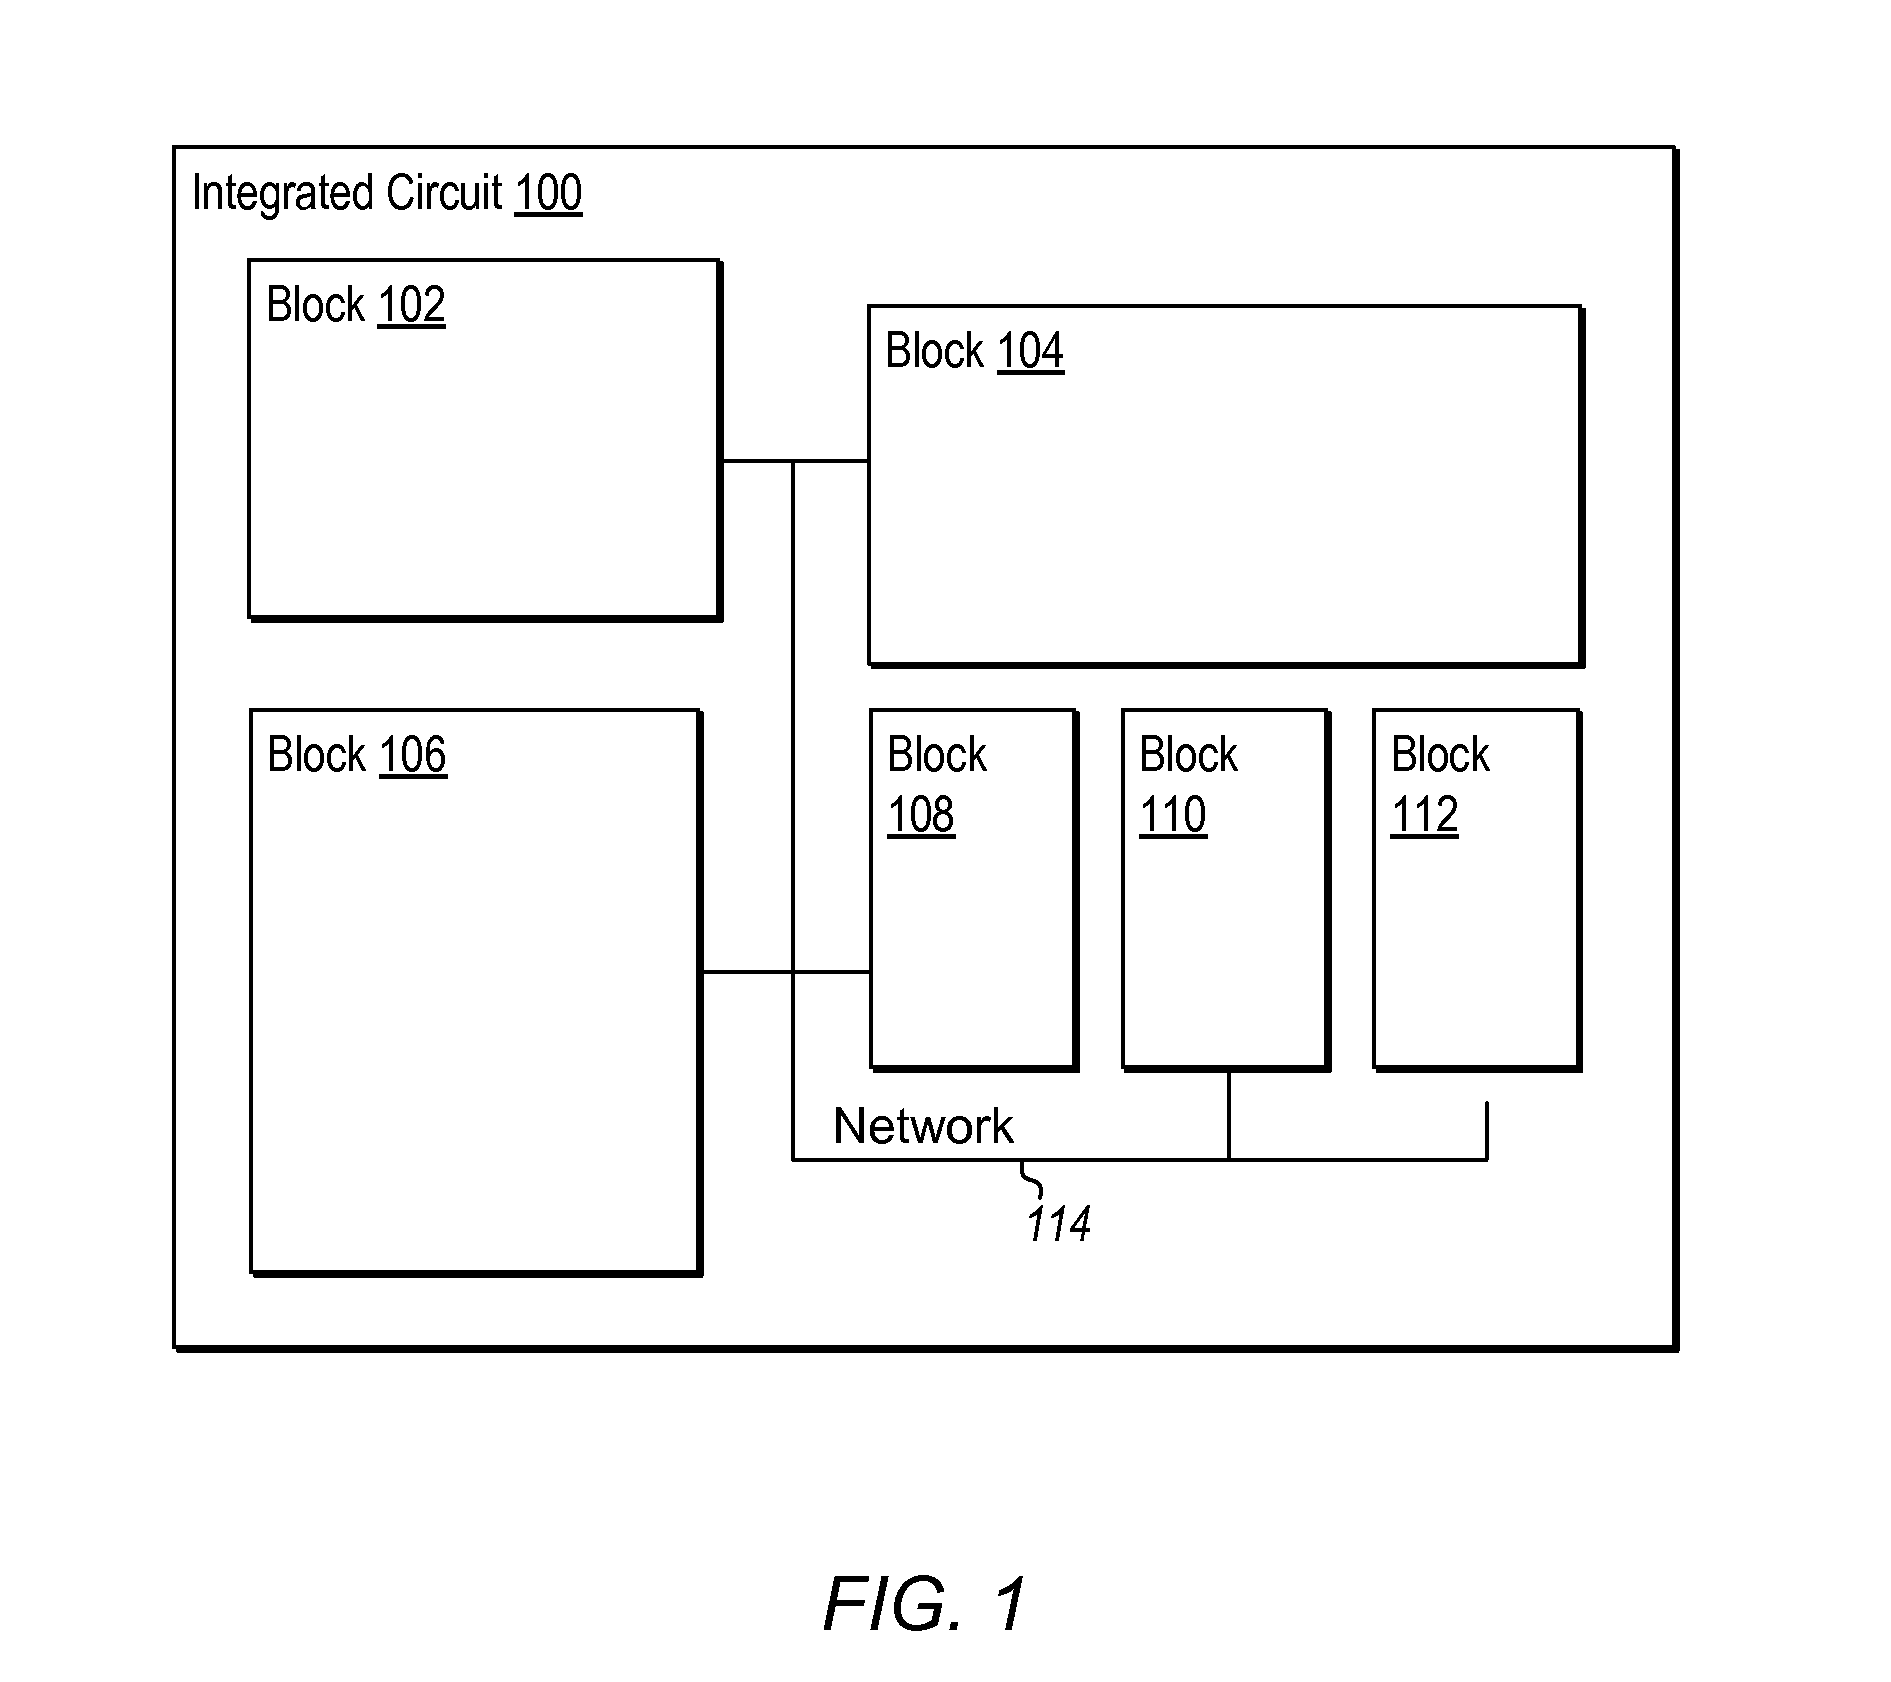 Method for determining wire lengths between nodes using a rectilinear steiner minimum tree (RSMT) with existing pre-routes algorithm